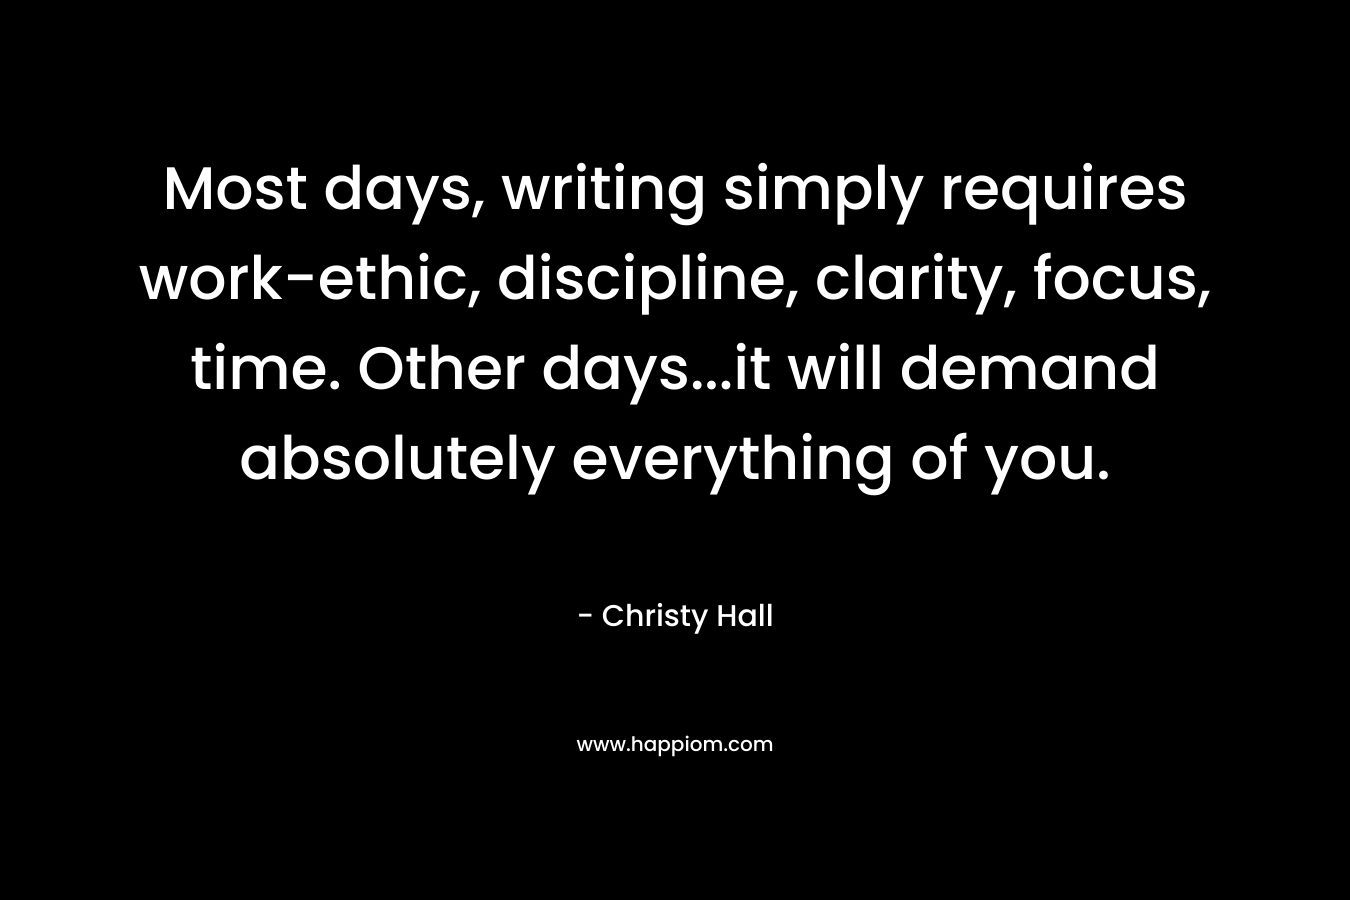 Most days, writing simply requires work-ethic, discipline, clarity, focus, time. Other days...it will demand absolutely everything of you.